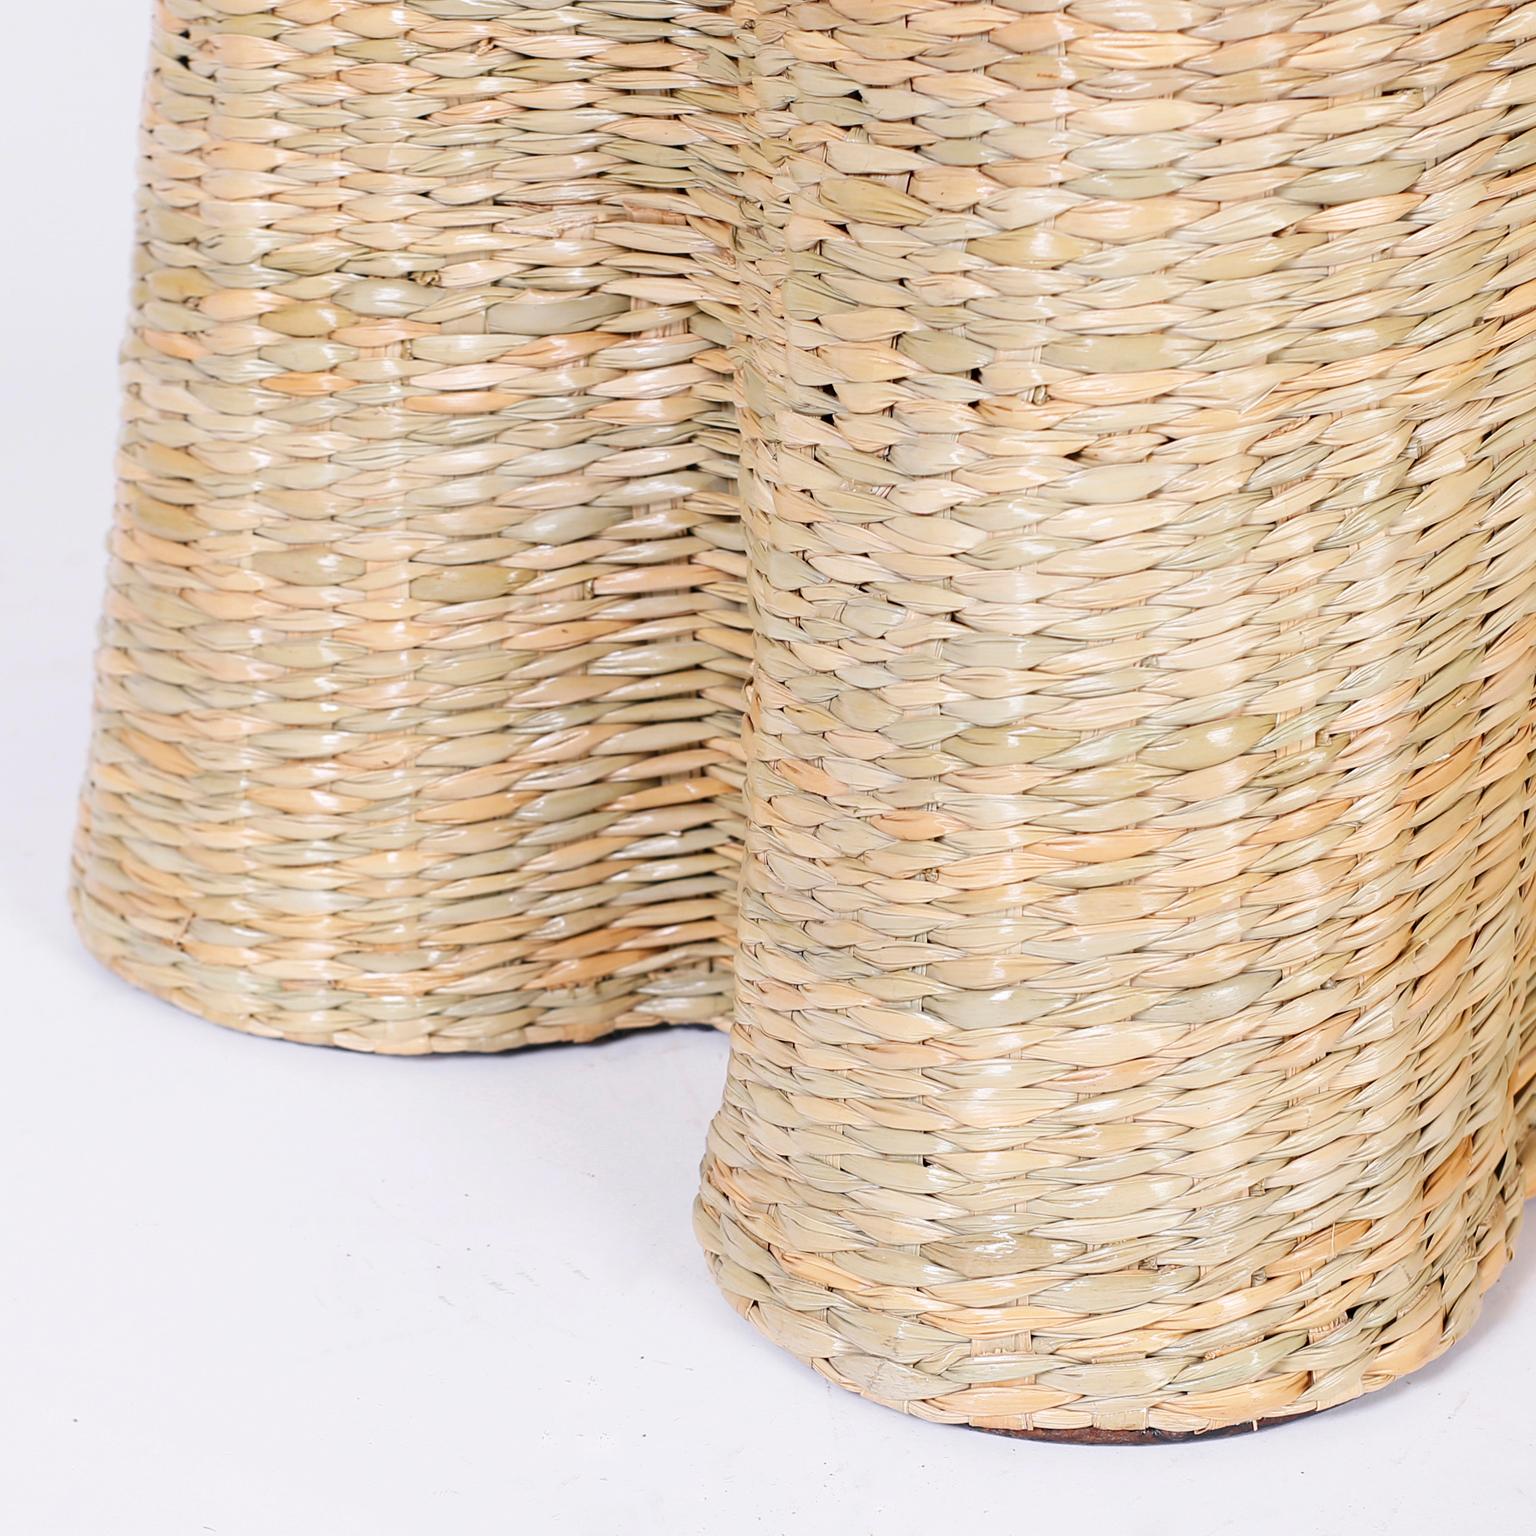 Pair of Wicker Drapery Ghost Tables or Stands from the FS Flores Collection 1